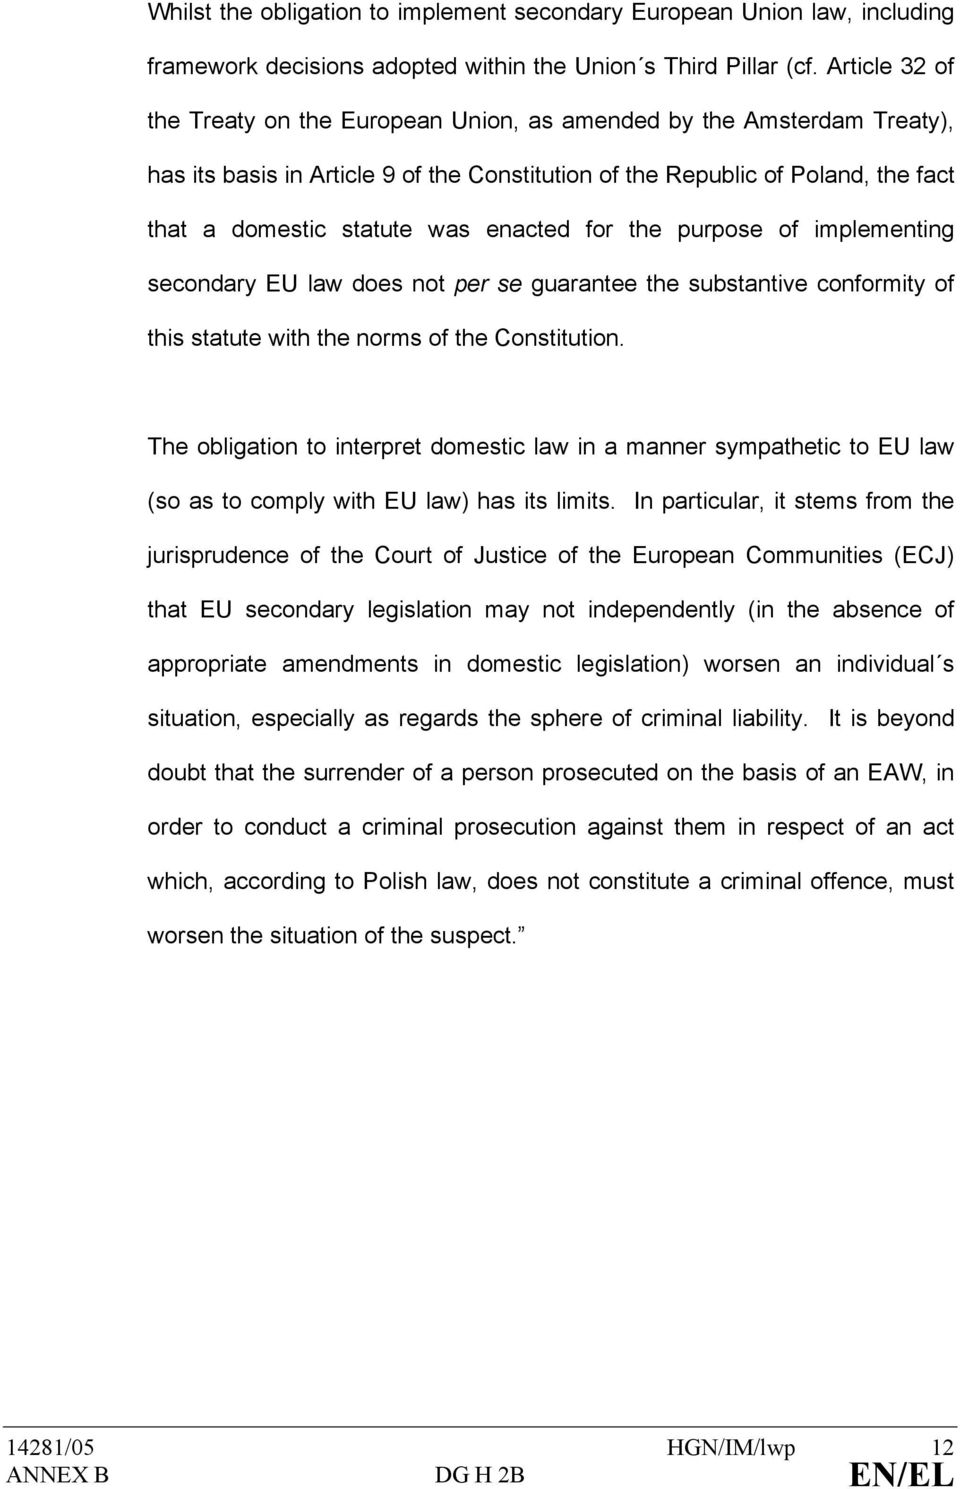 enacted for the purpose of implementing secondary EU law does not per se guarantee the substantive conformity of this statute with the norms of the Constitution.